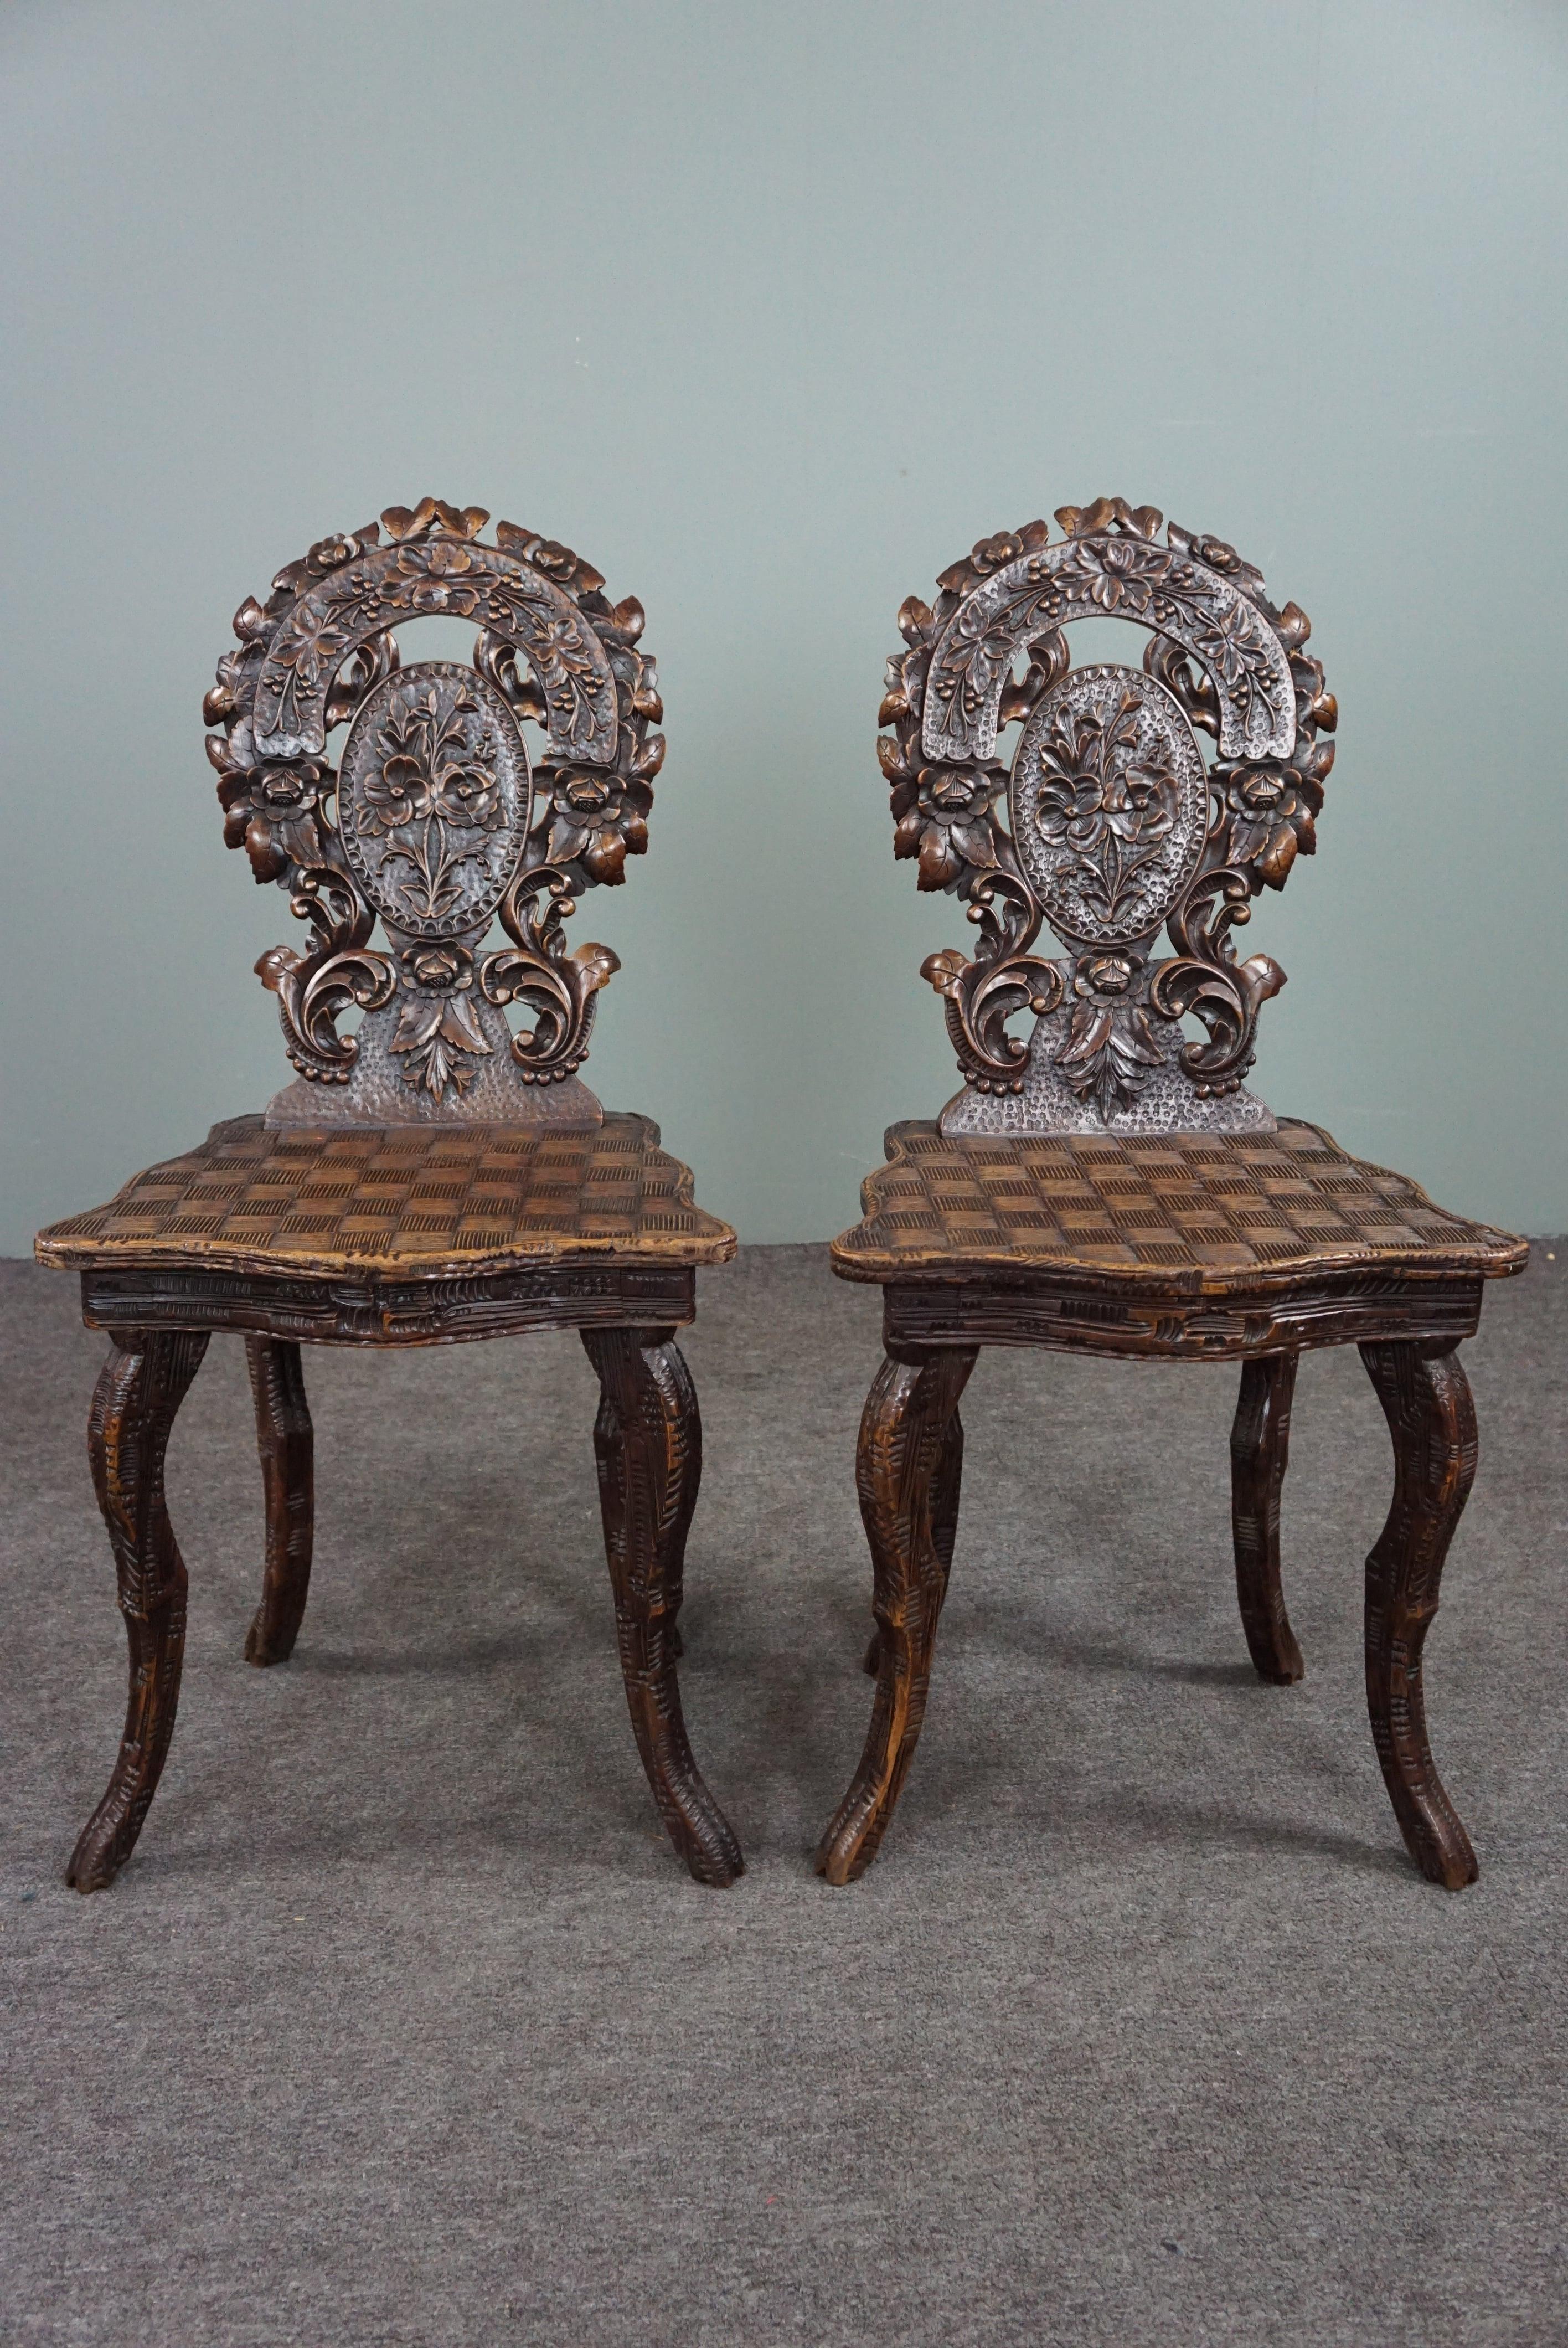 Offered is this beautiful set from the end of the 19th century, sculpted with woody & floral motifs.

This set has very beautiful wood carvings with flower and leaf motifs and a striking square woven pattern on the seat. The backrest stands out